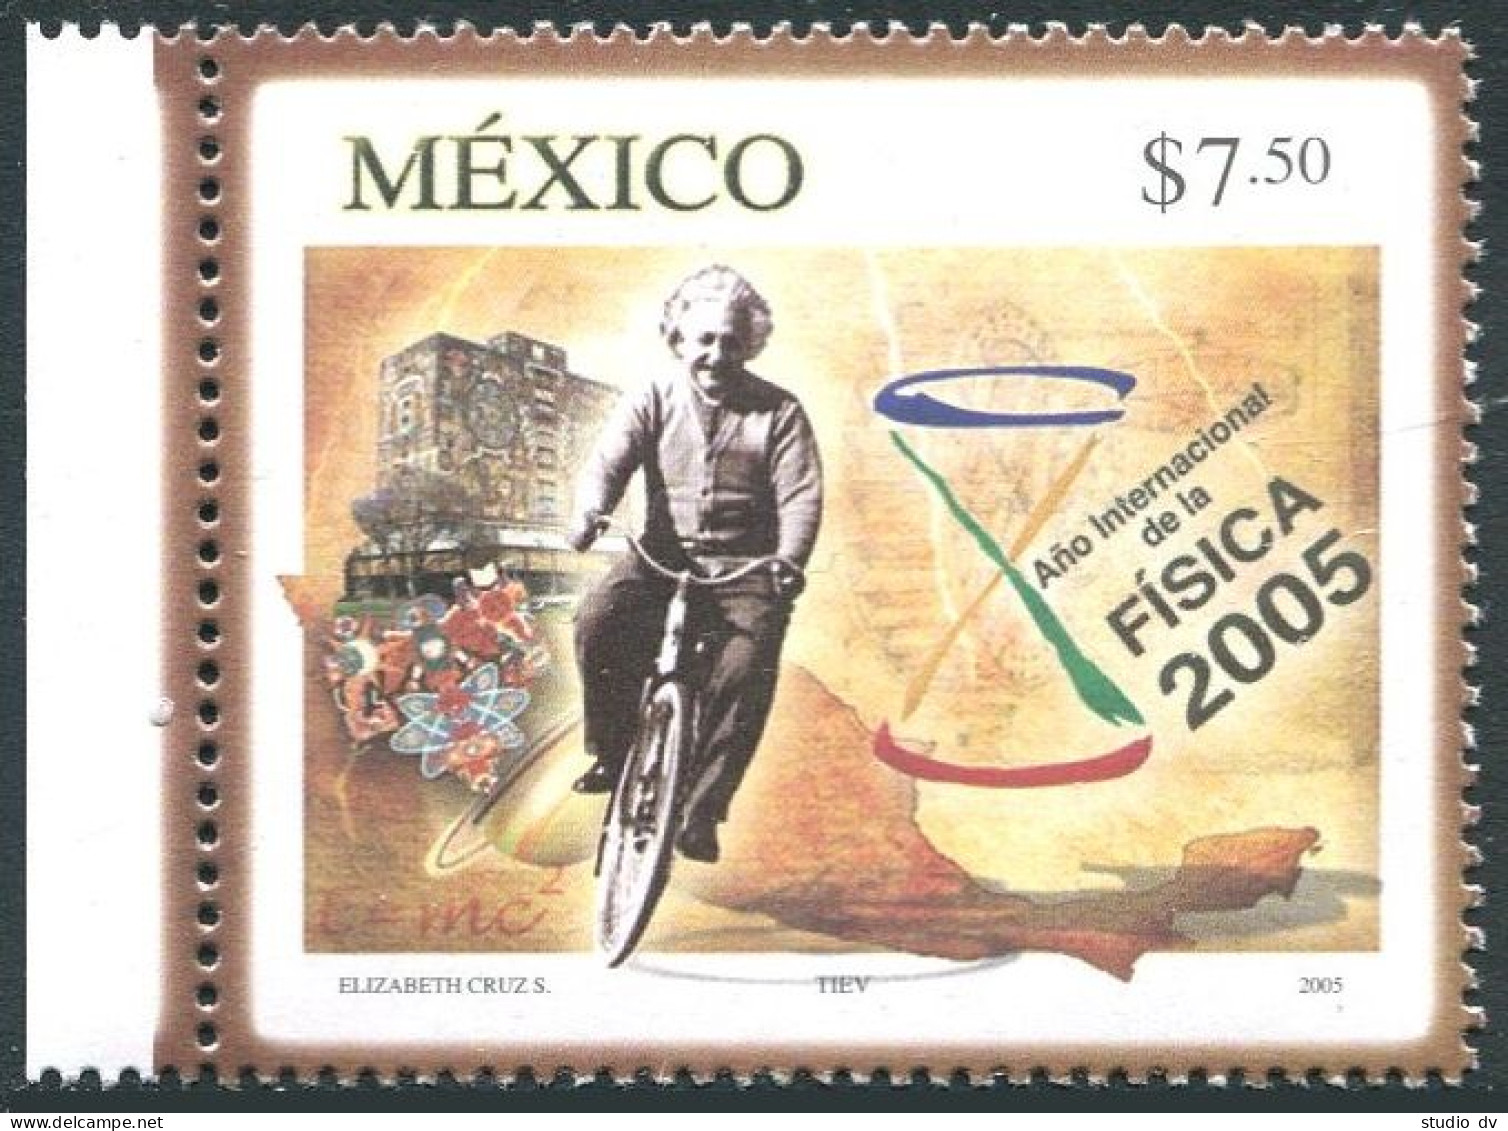 Mexico 2444, MNH. Year Of Physics, 2005. Albert Einstein, Bicycle. - Mexique